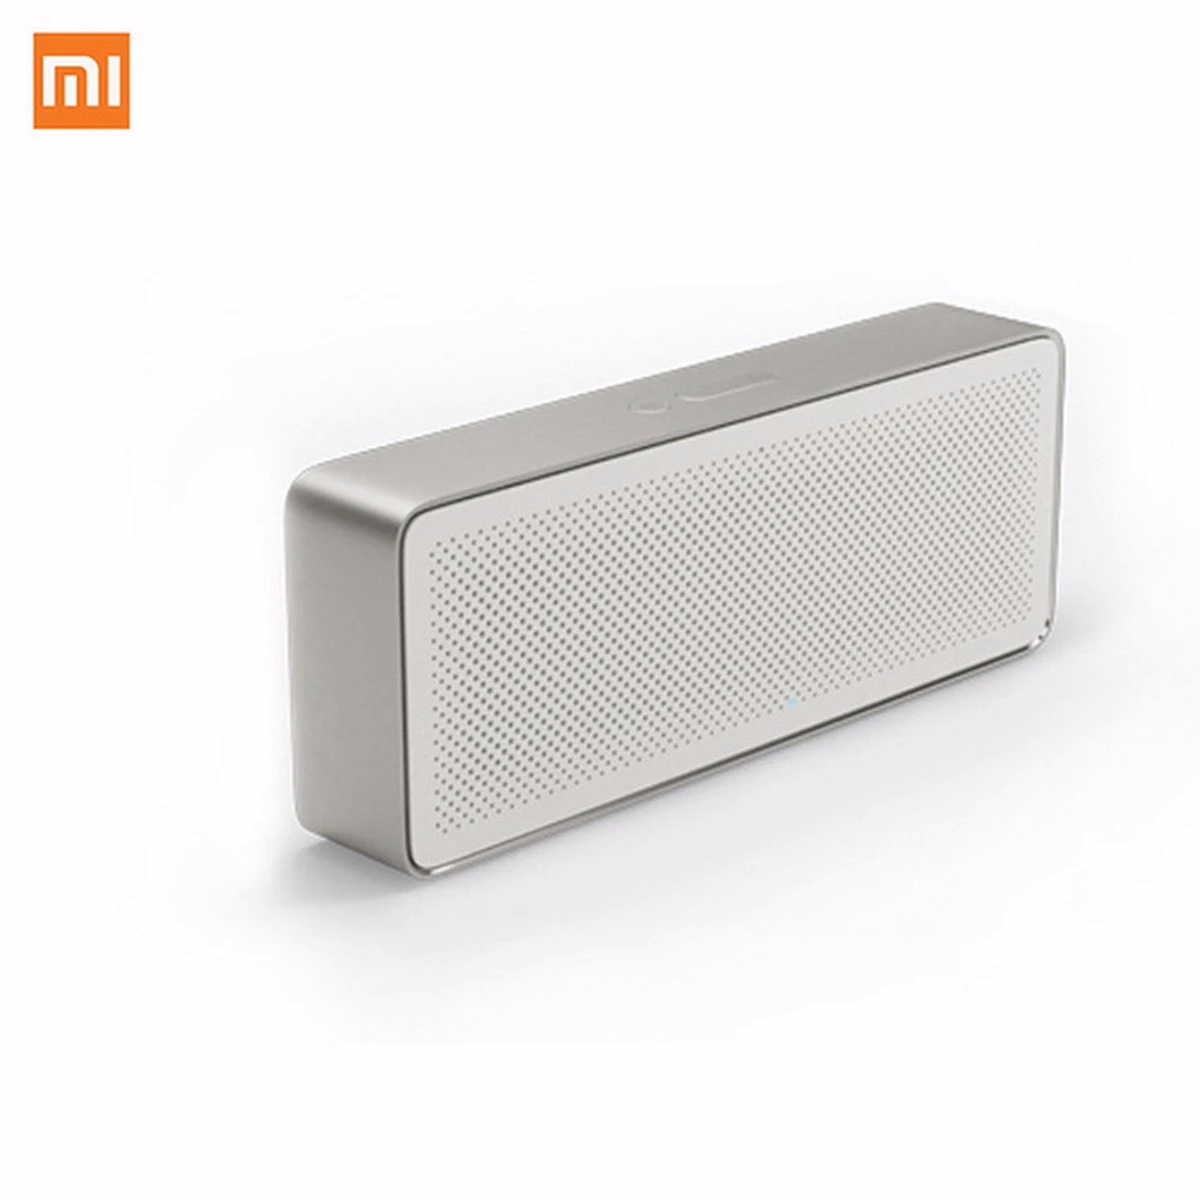 Xiaomi Mi Bluetooth Speaker Square Box 2 Stereo Portable Bluetooth 4.2 HD  High Definition Sound Quality Play Music|Portable Speakers| - AliExpress